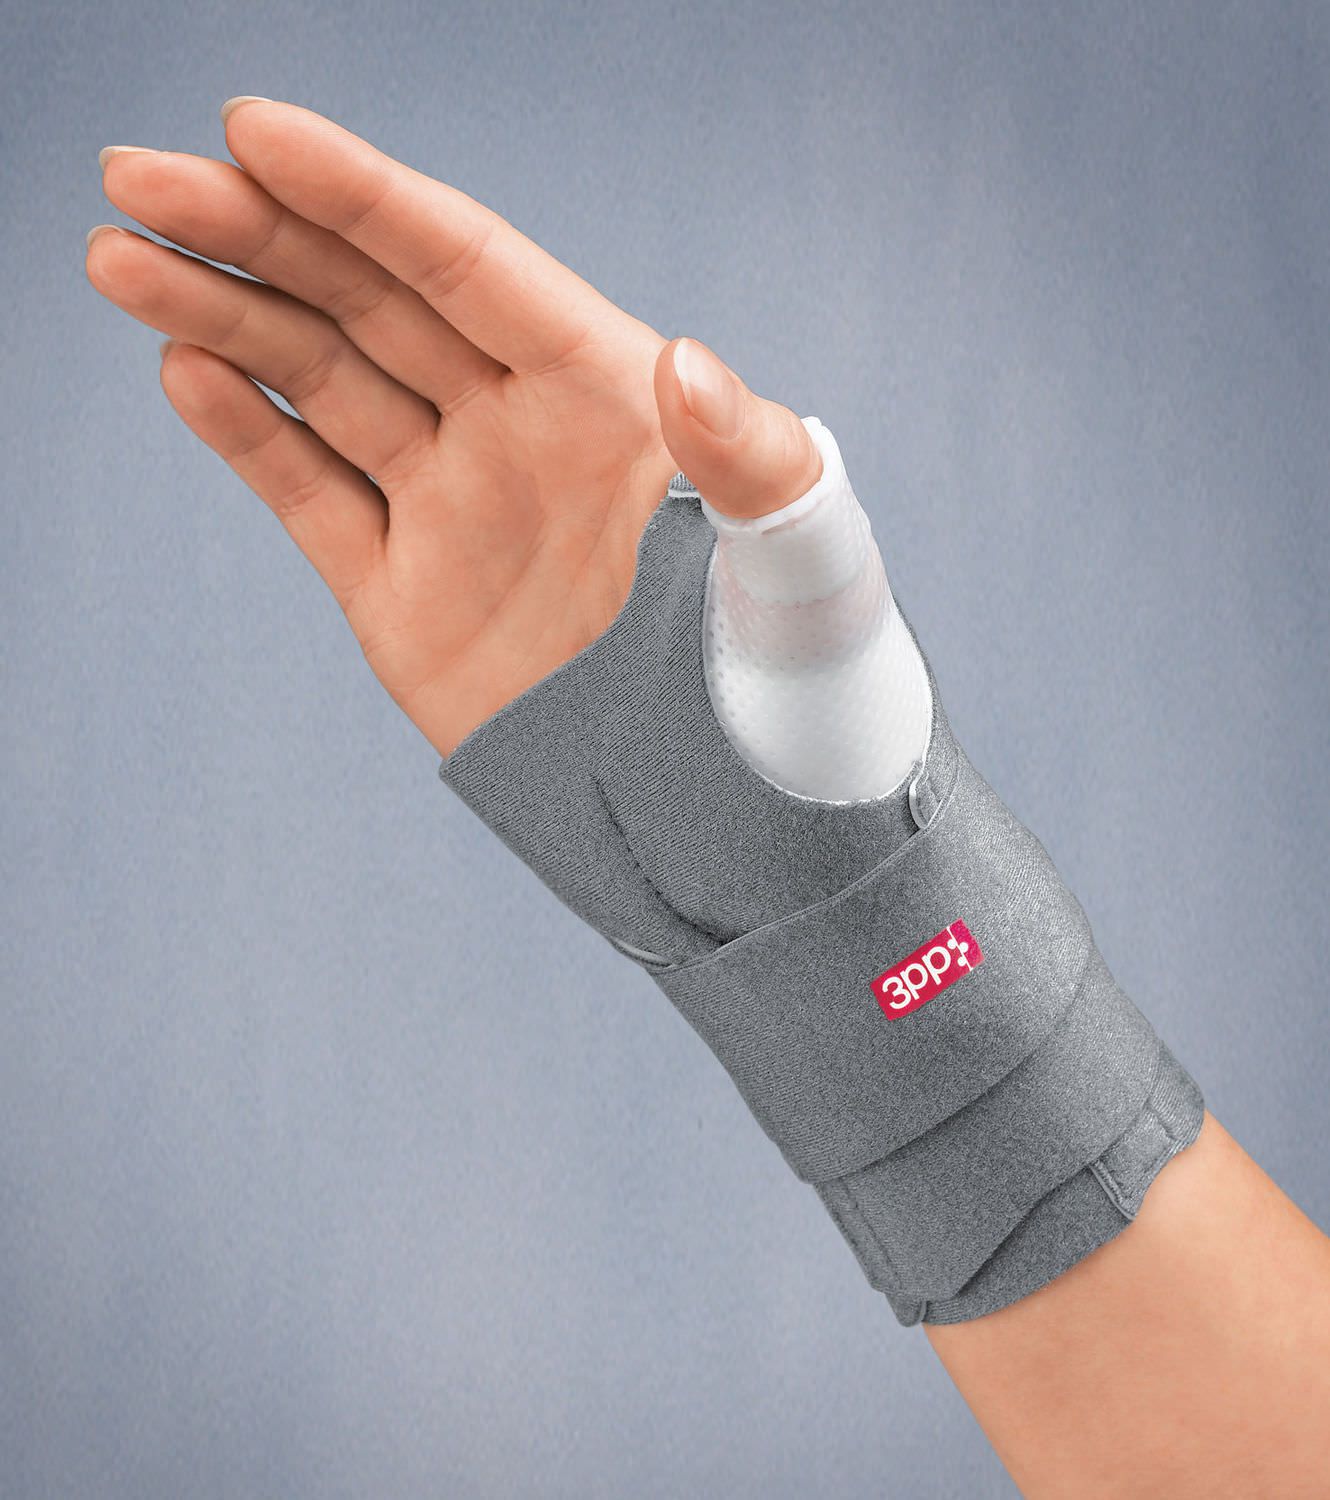 Thumb splint (orthopedic immobilization) / wrist strap 3PP® THUMSPICA™ PLUS 3-Point Products